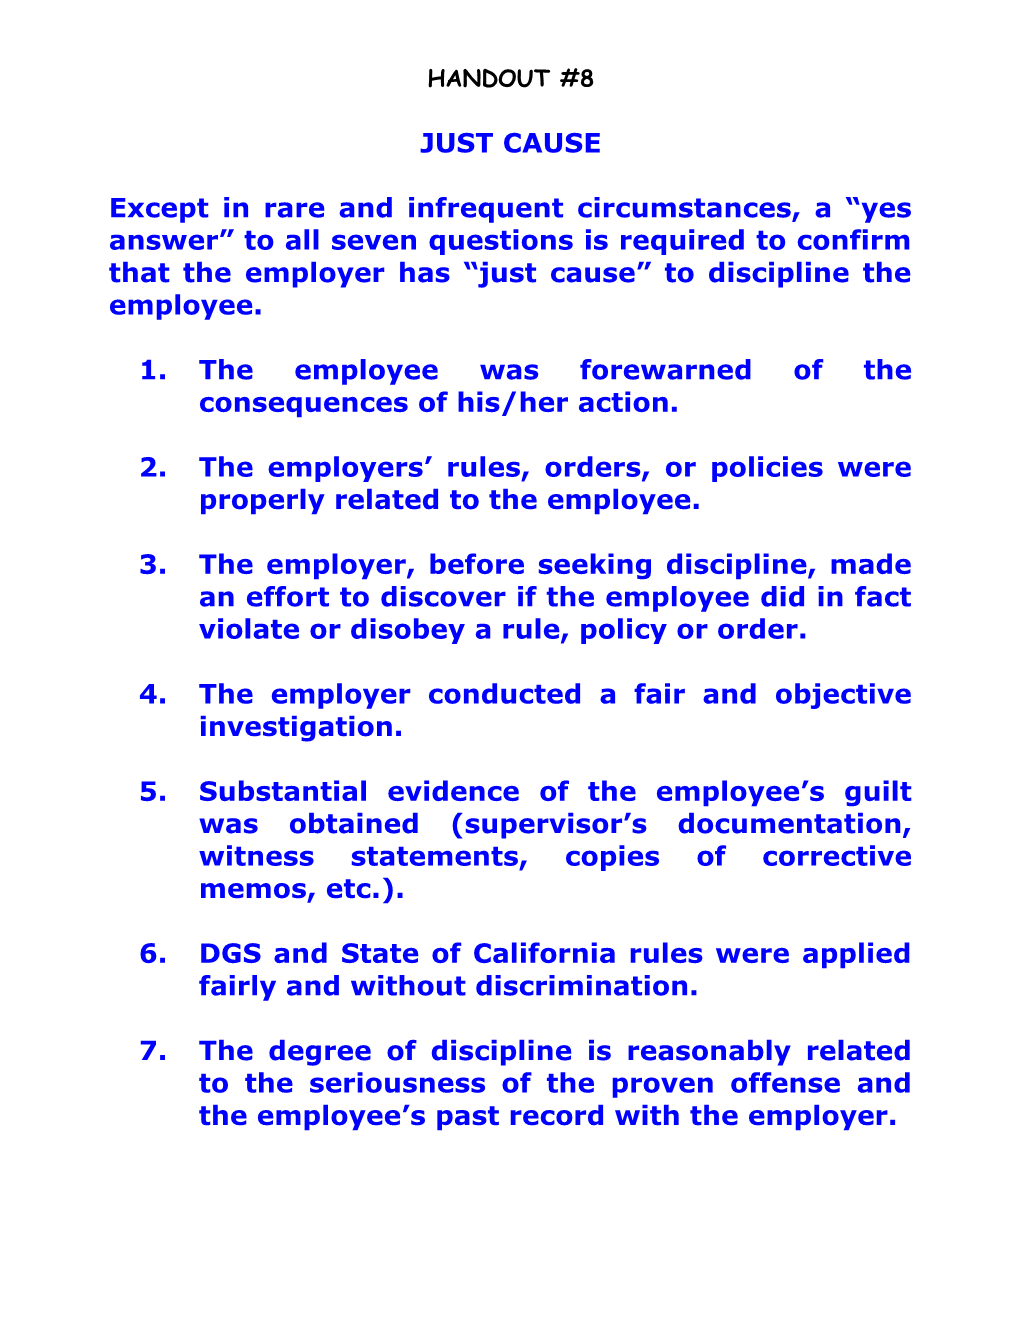 1. the Employee Was Forewarned of the Consequences of His/Her Action